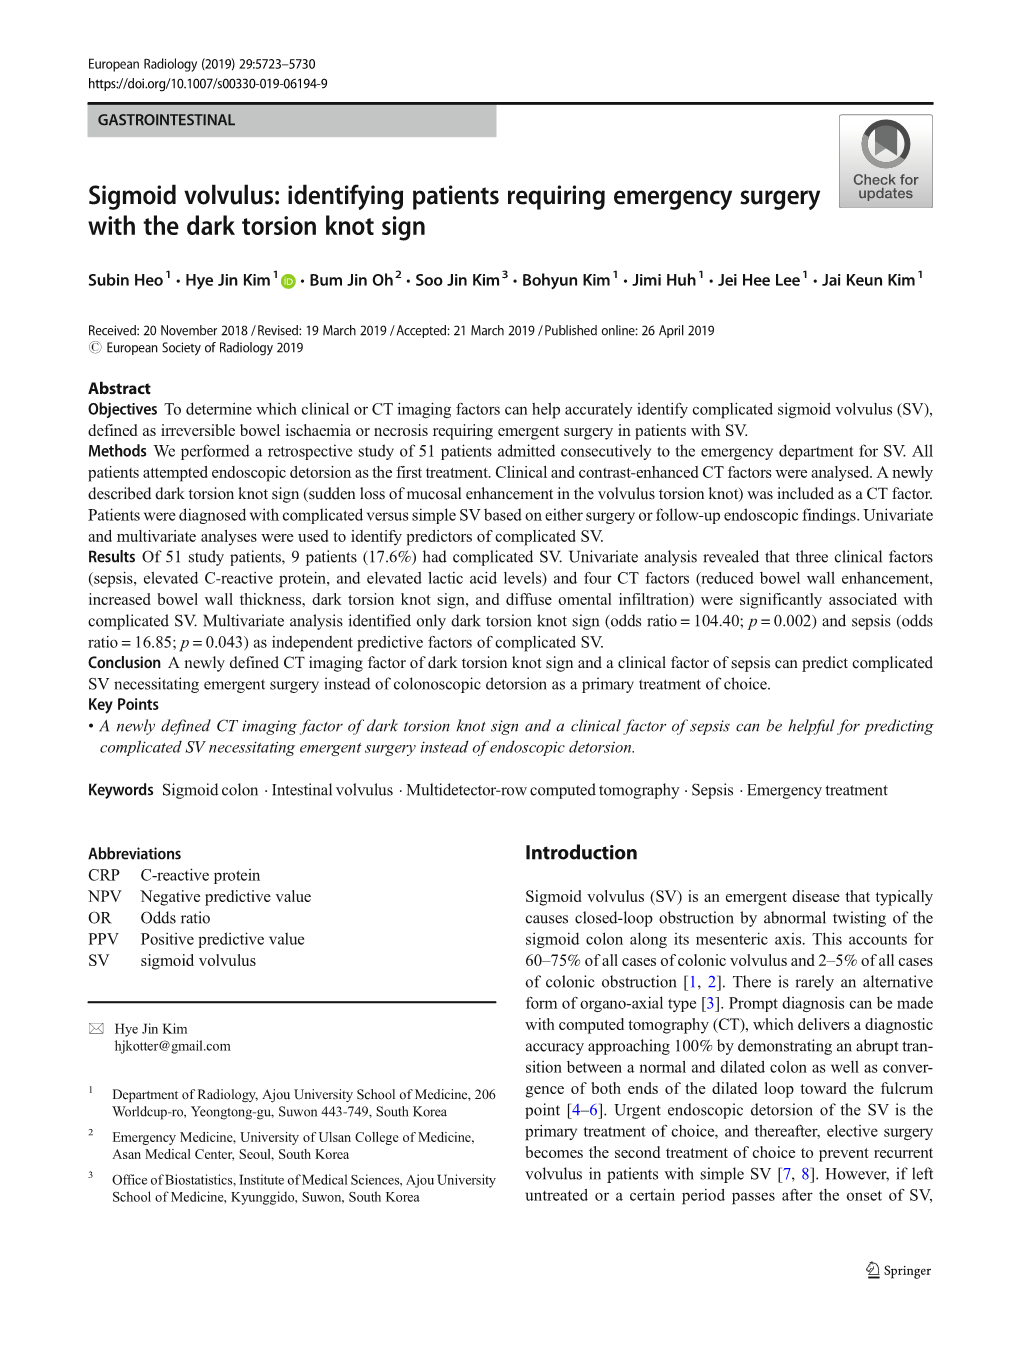 Sigmoid Volvulus: Identifying Patients Requiring Emergency Surgery with the Dark Torsion Knot Sign